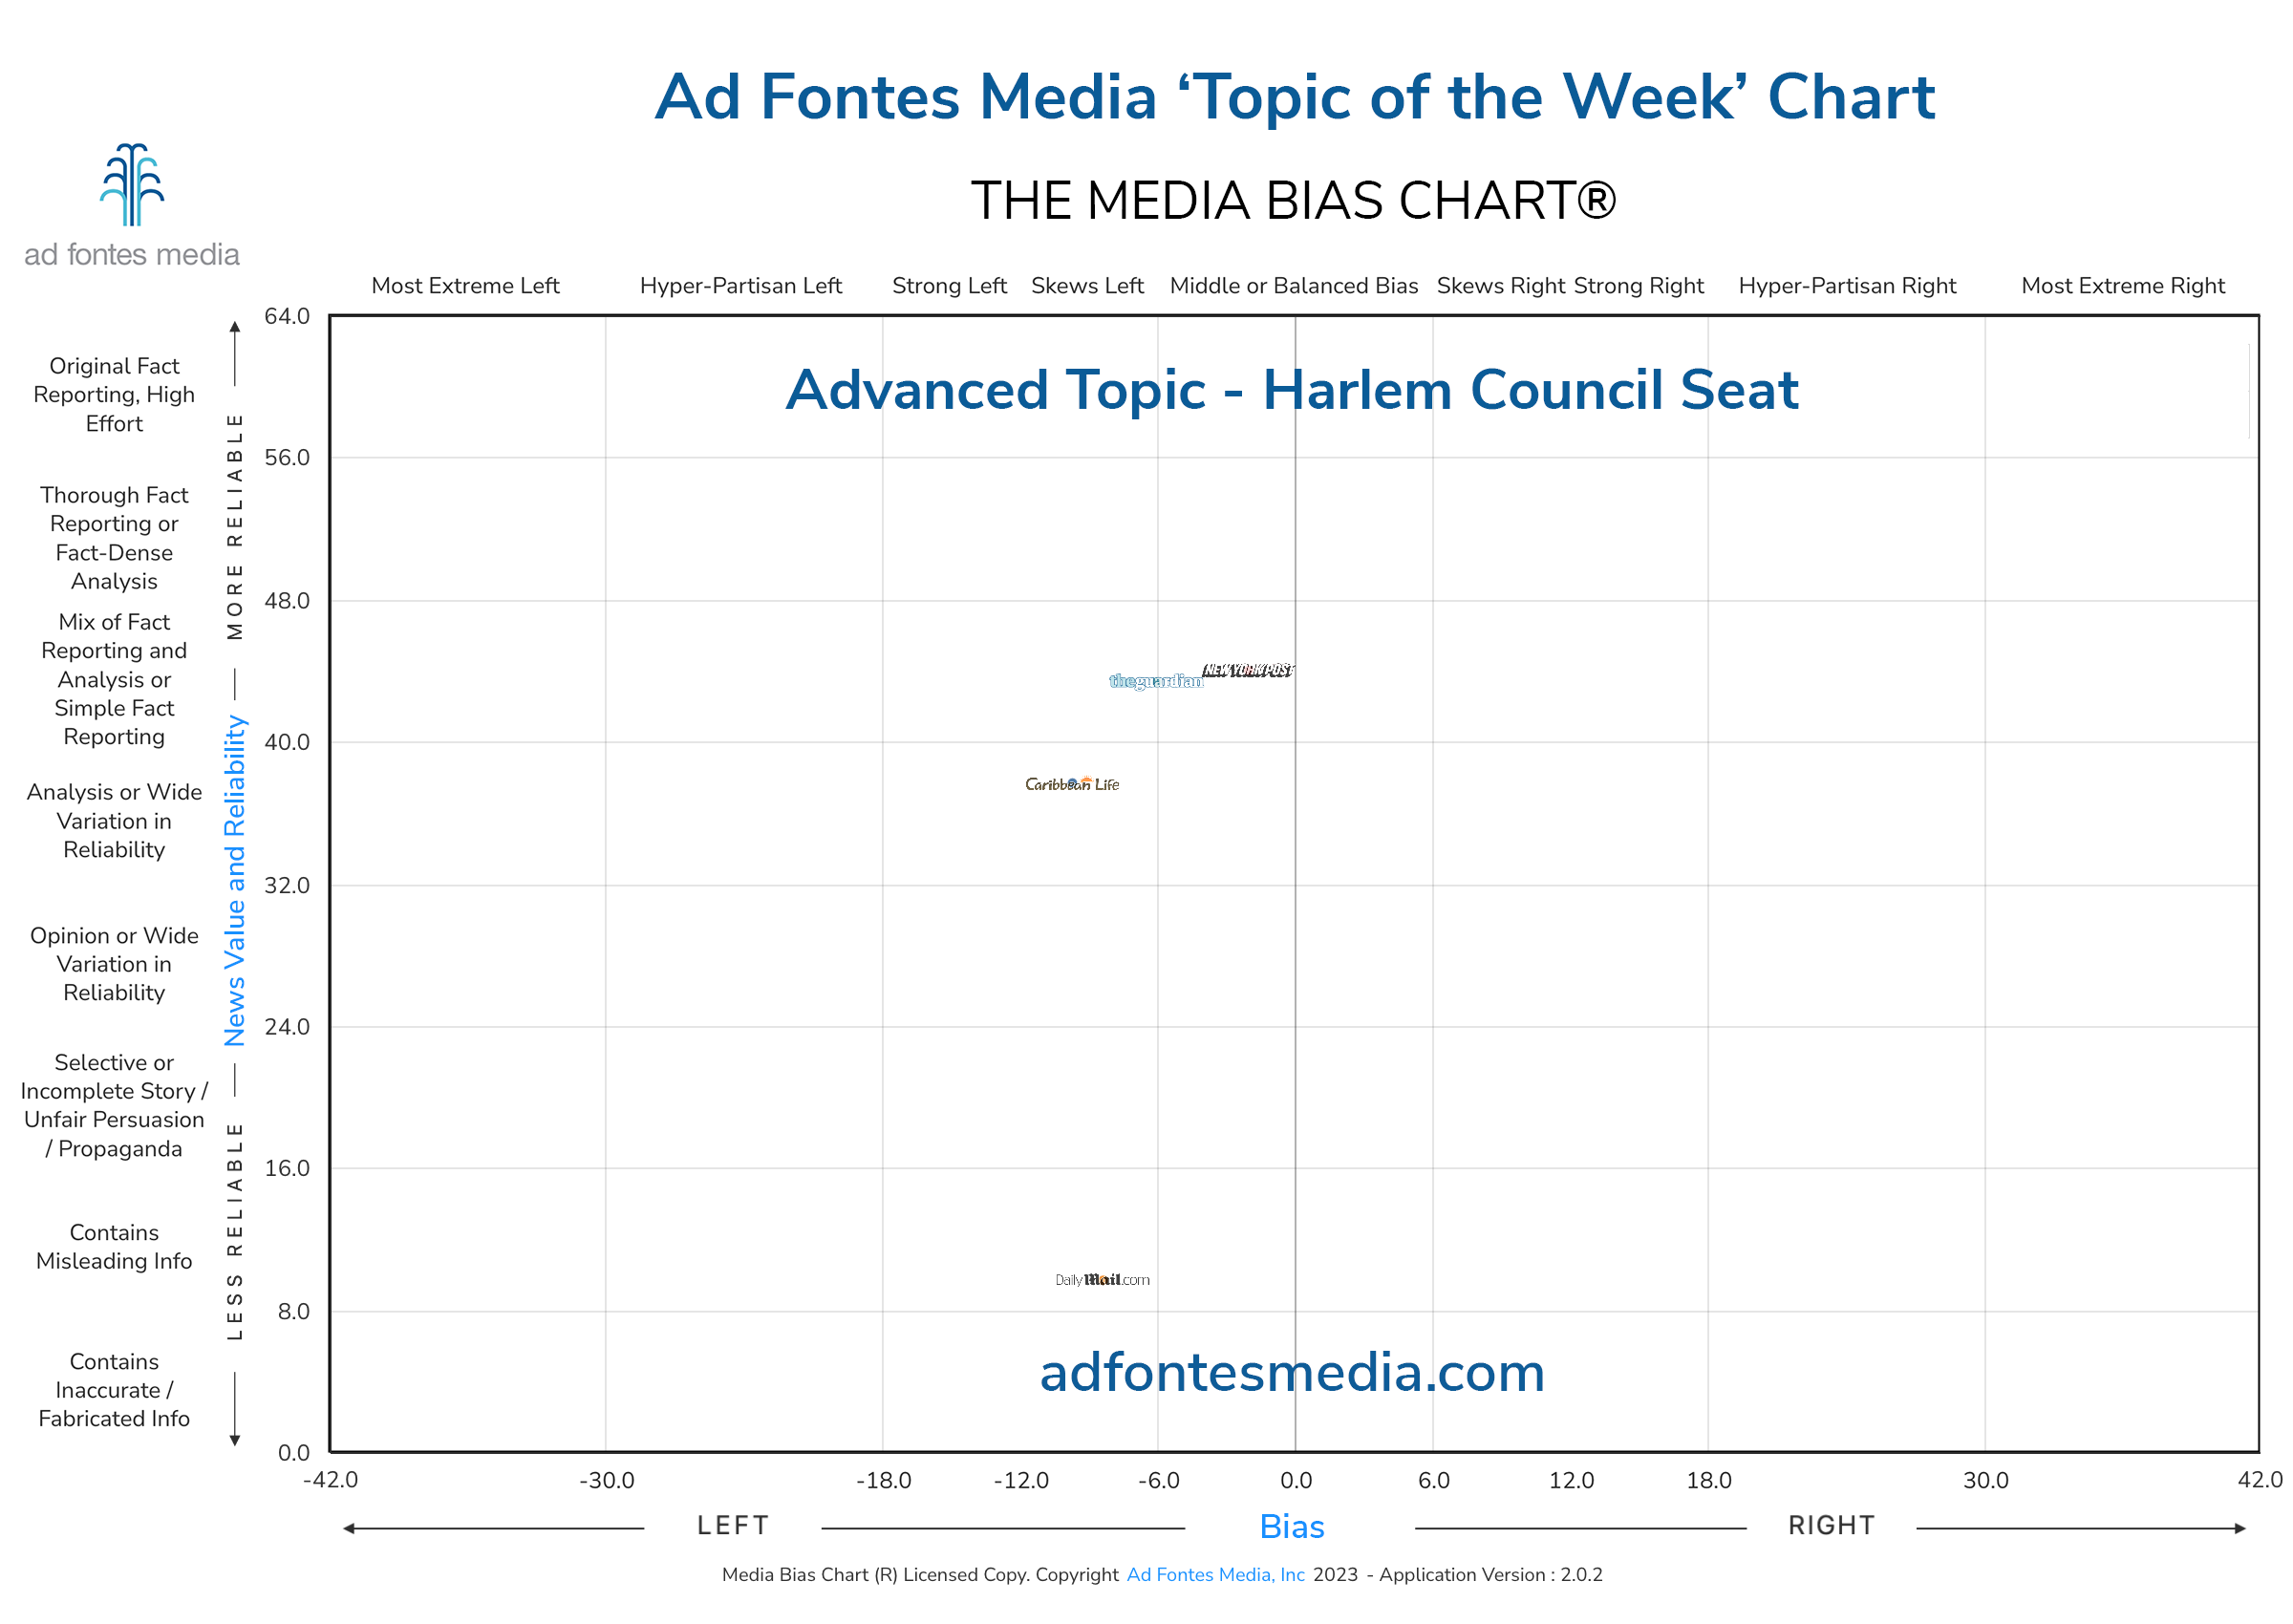 Scores of the Harlem Council Seat articles on the chart